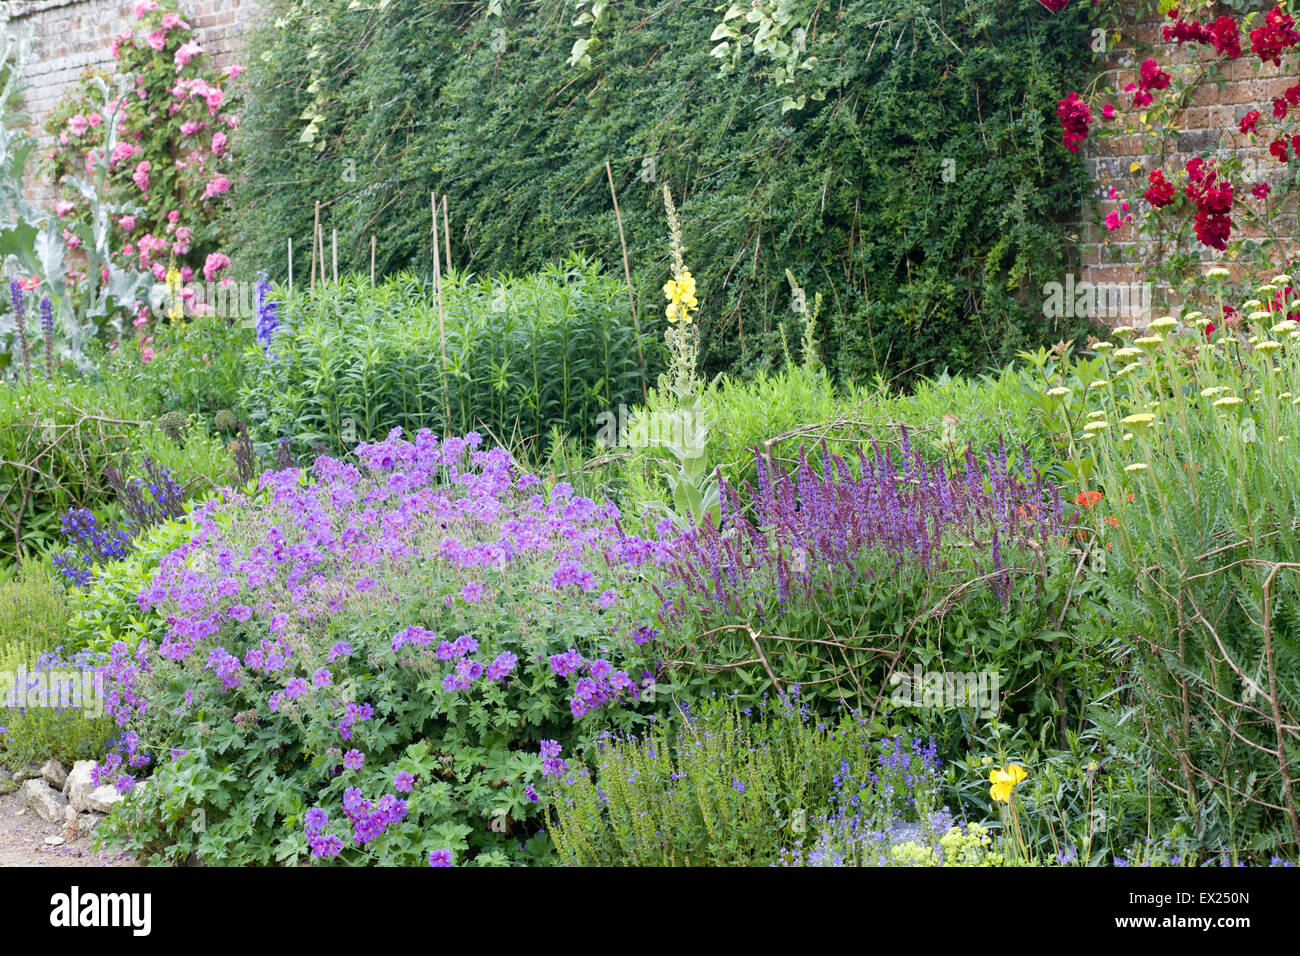 Classical herbaceous border in a walled Garden Stock Photo